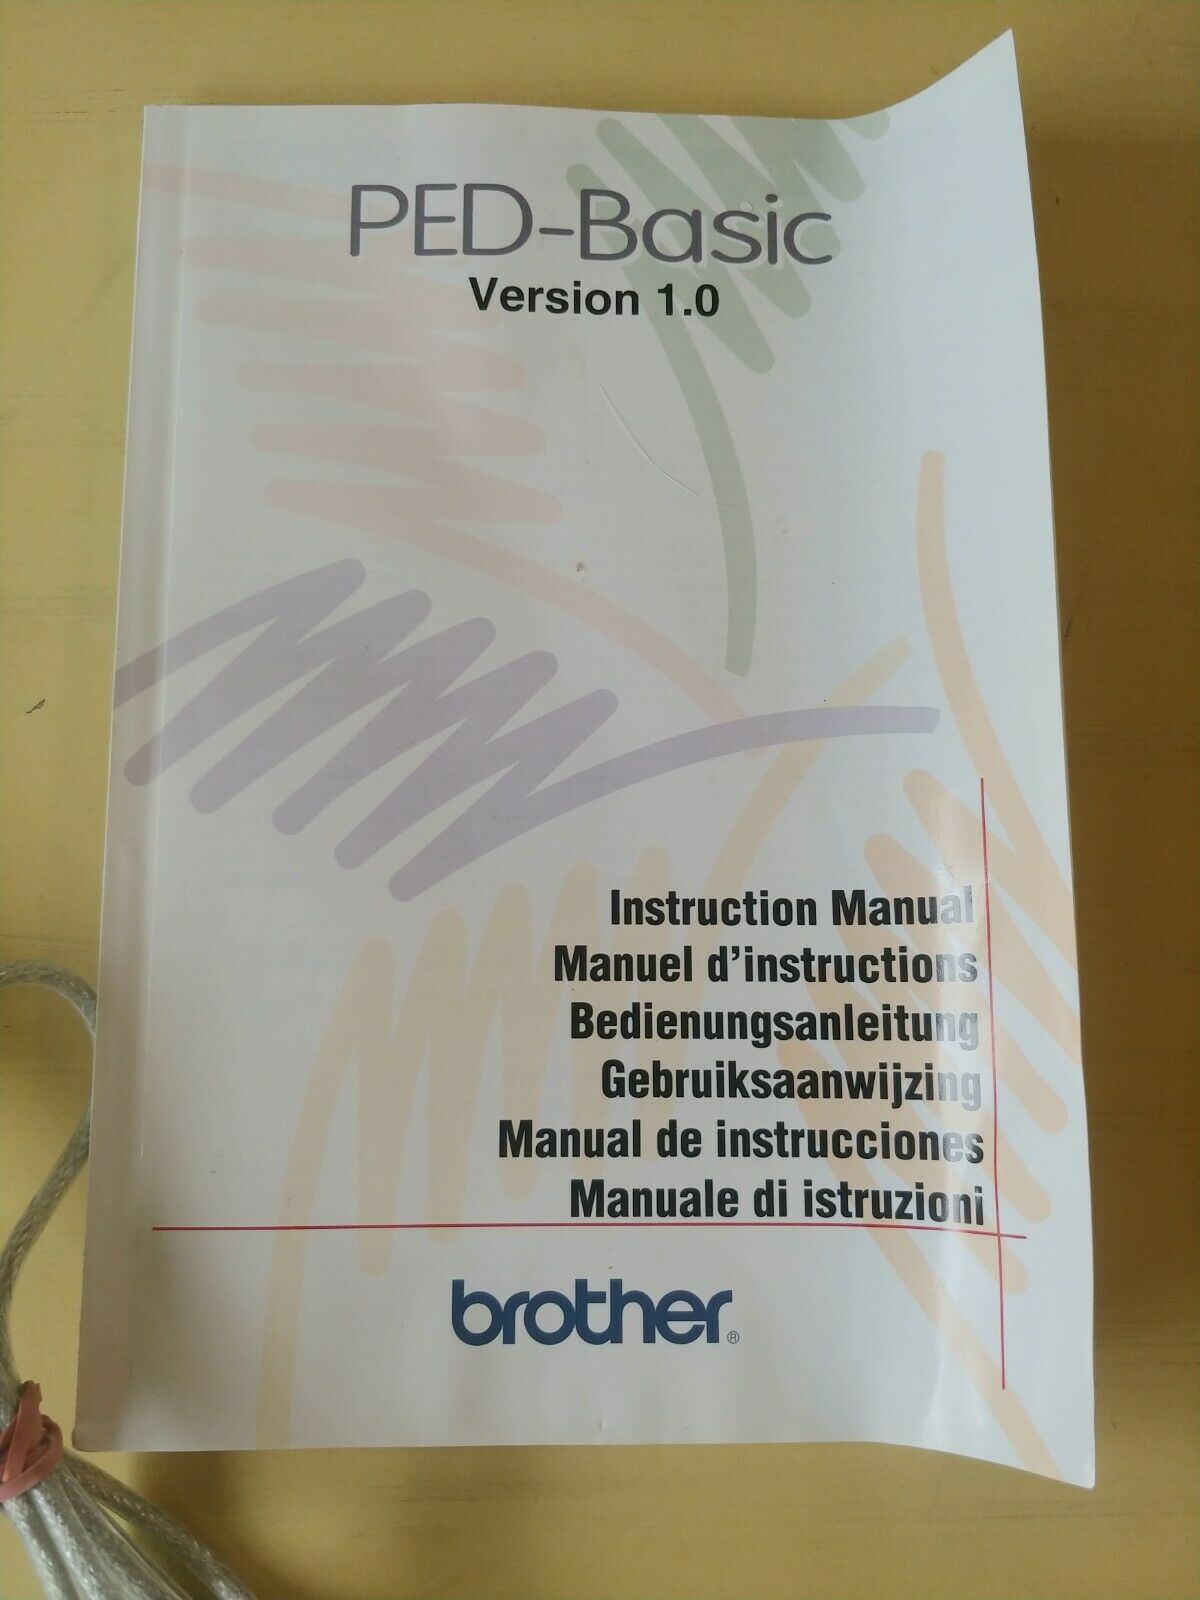 brother ped basic card writer driver